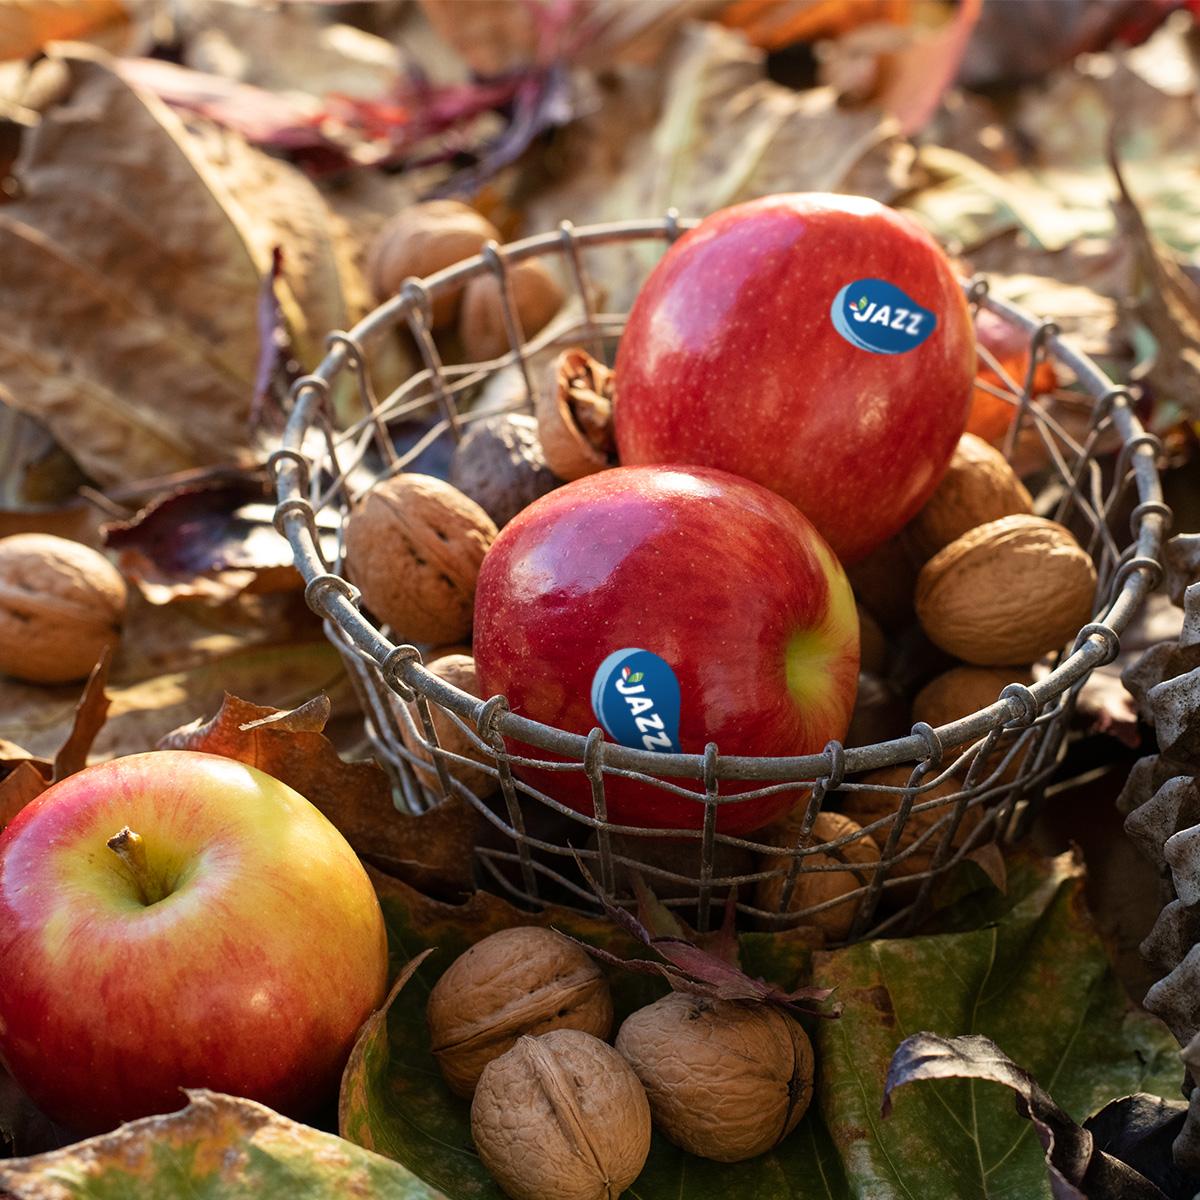 October 21st – Apple Day!